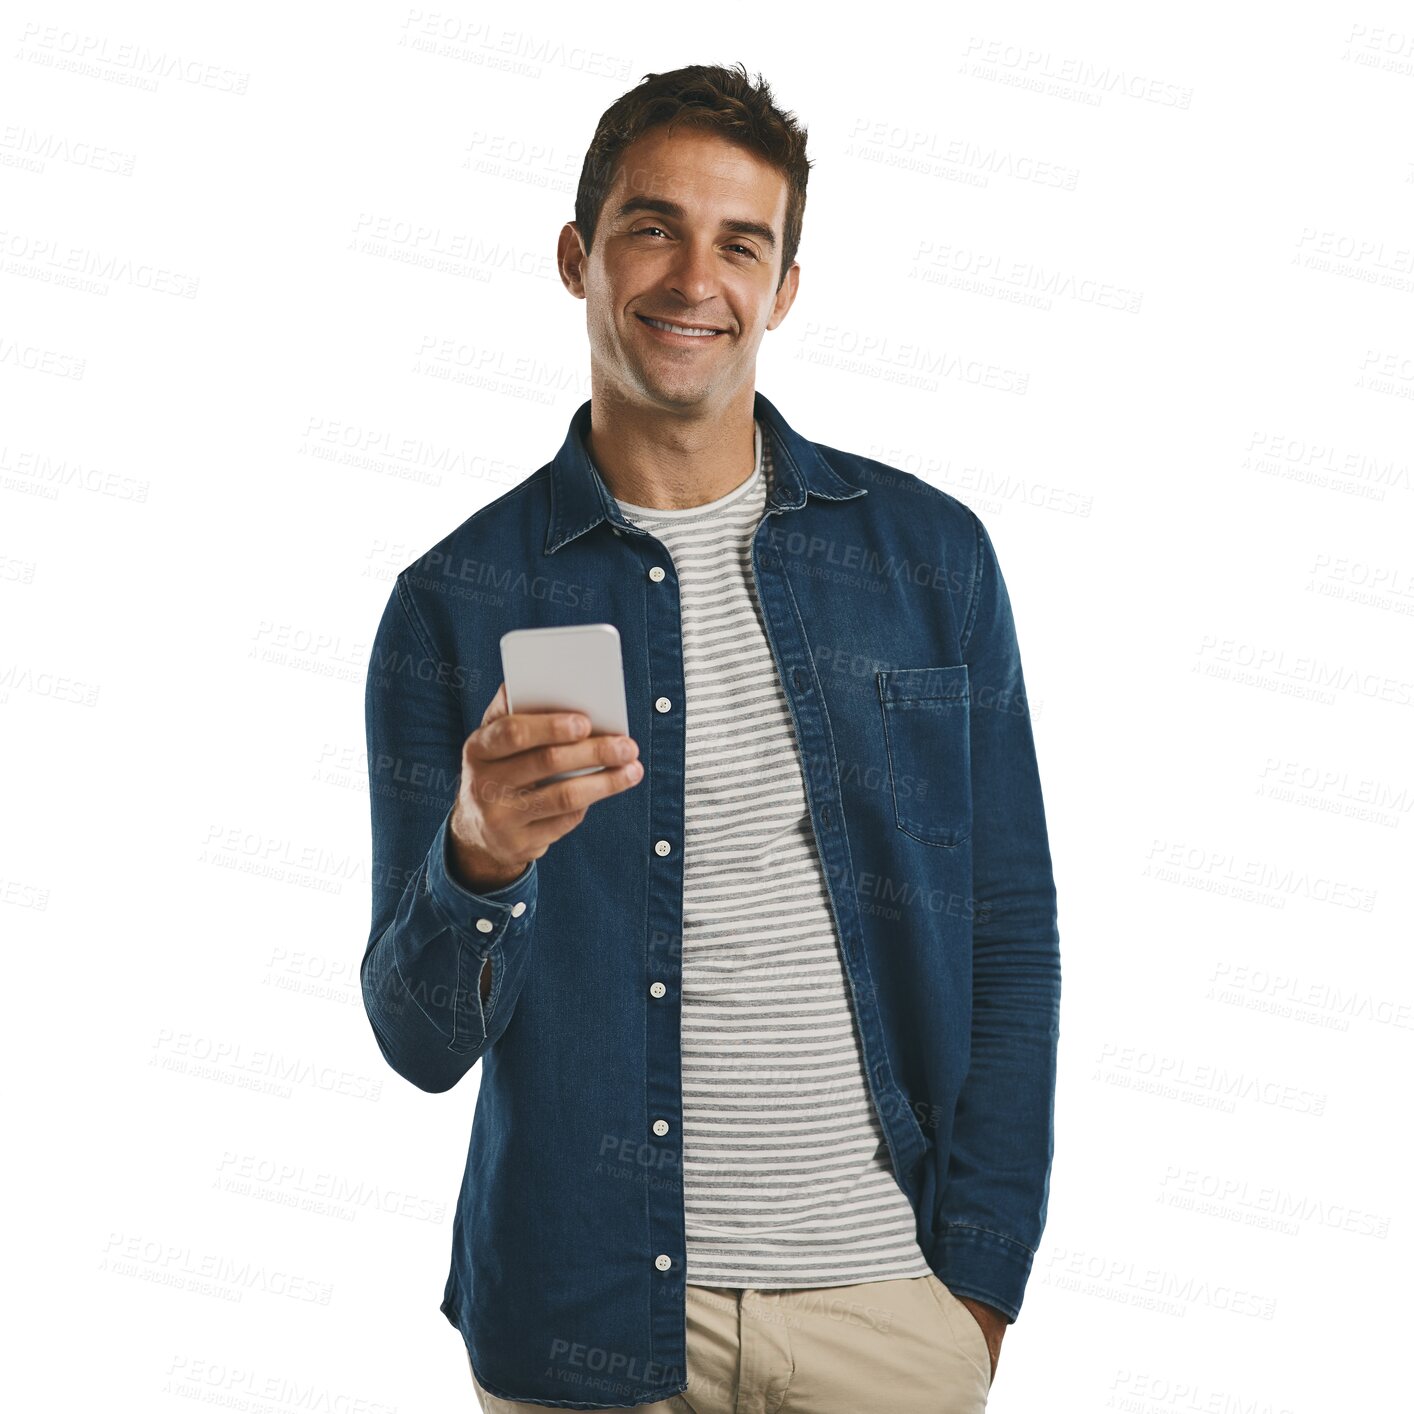 Buy stock photo Portrait, smile and man with phone for social media, internet and communication isolated on a transparent png background. Face, smartphone and happy person on mobile app, technology and cellphone